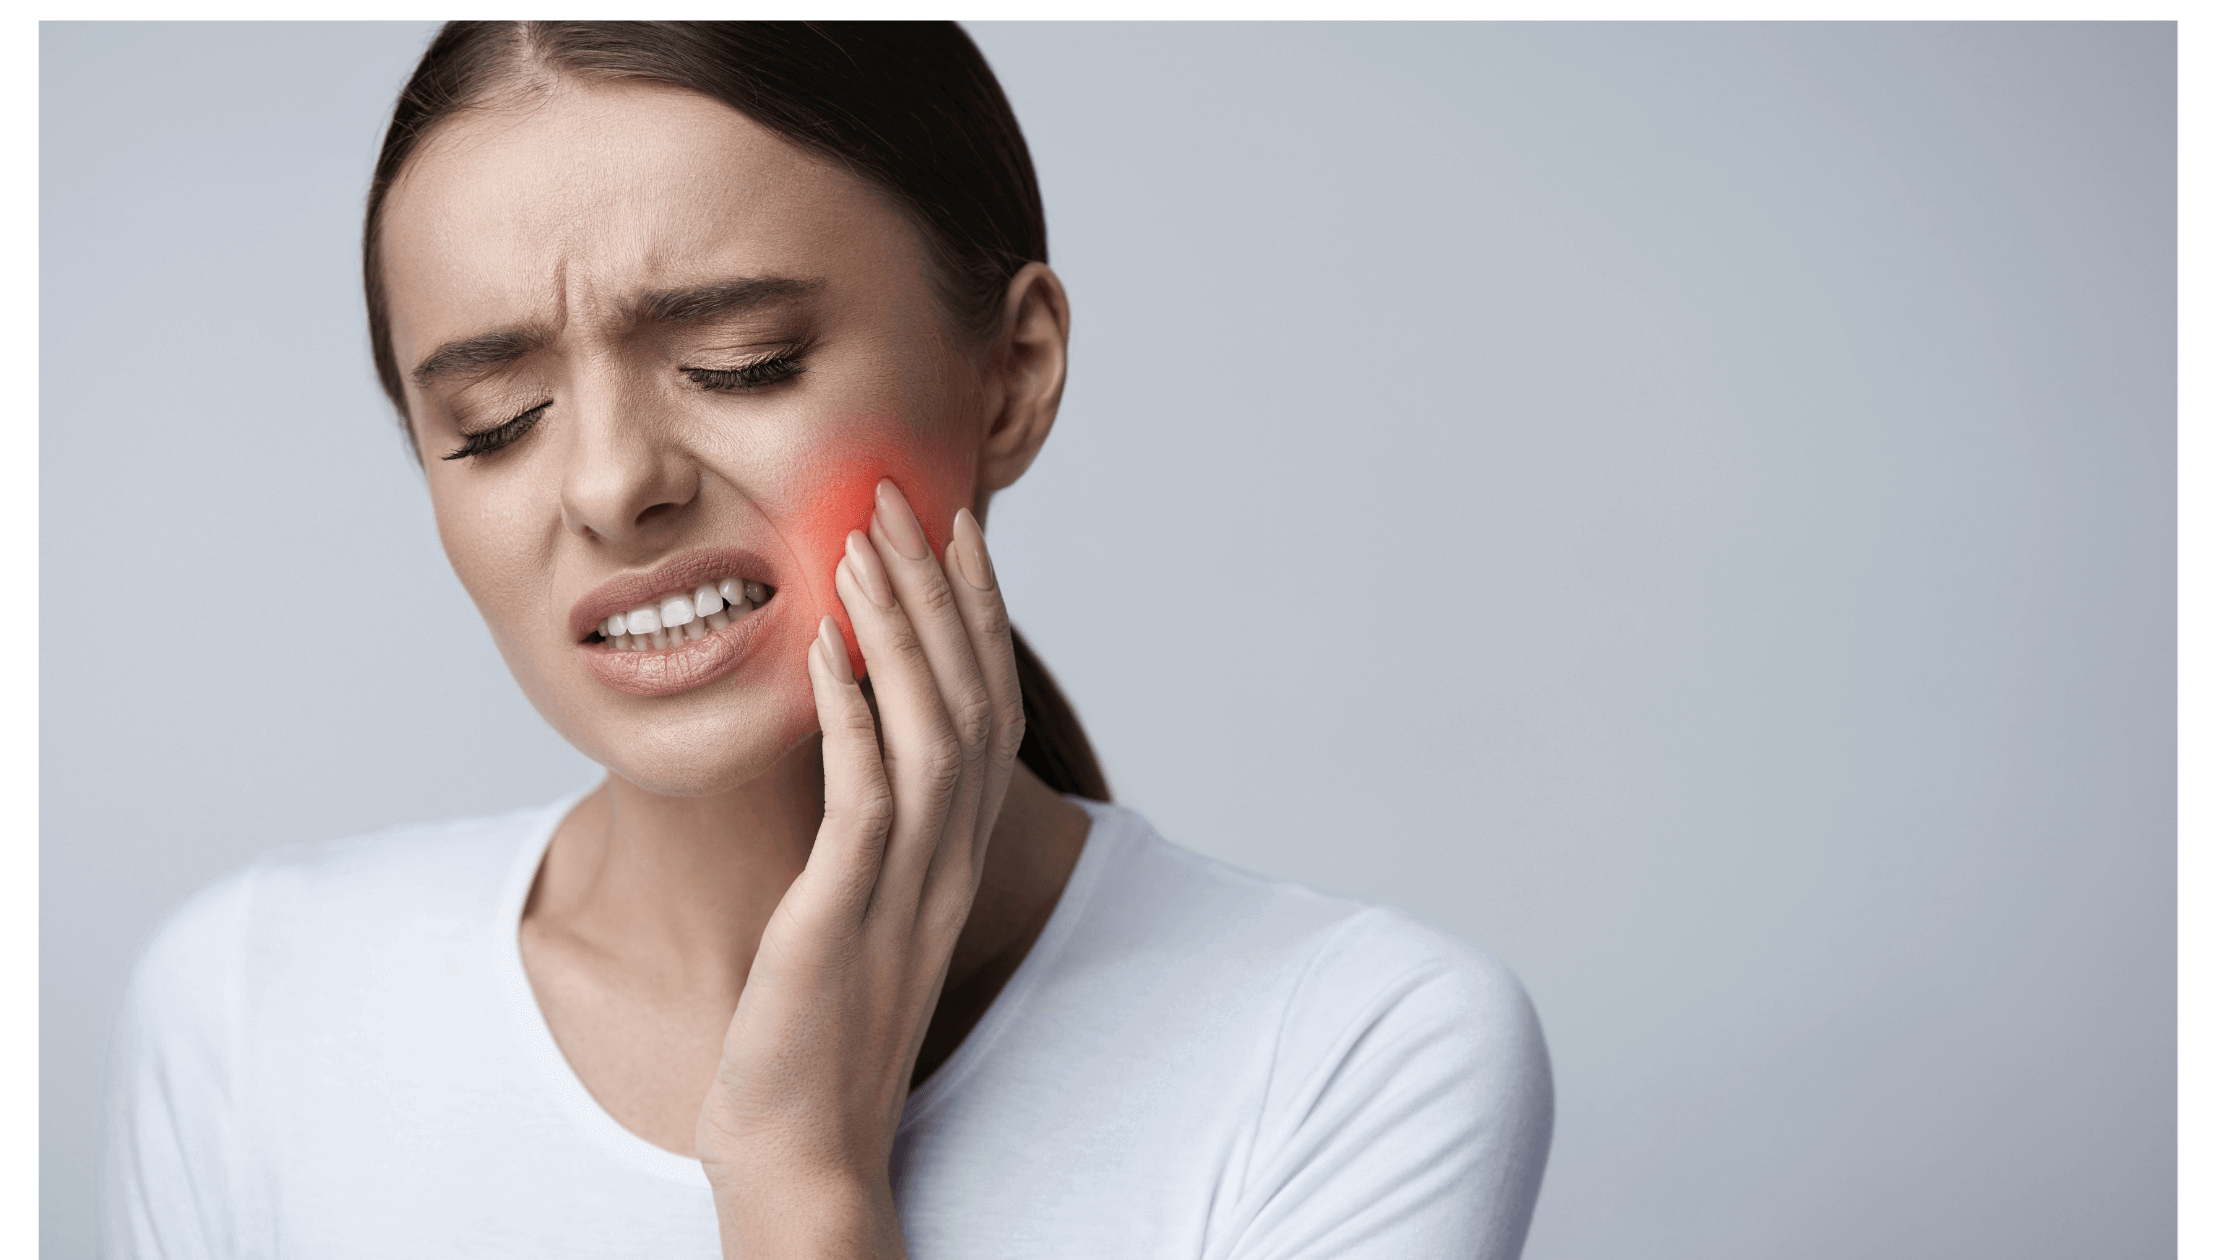 How to Kill Tooth Pain Nerve in 3 Seconds Permanently?